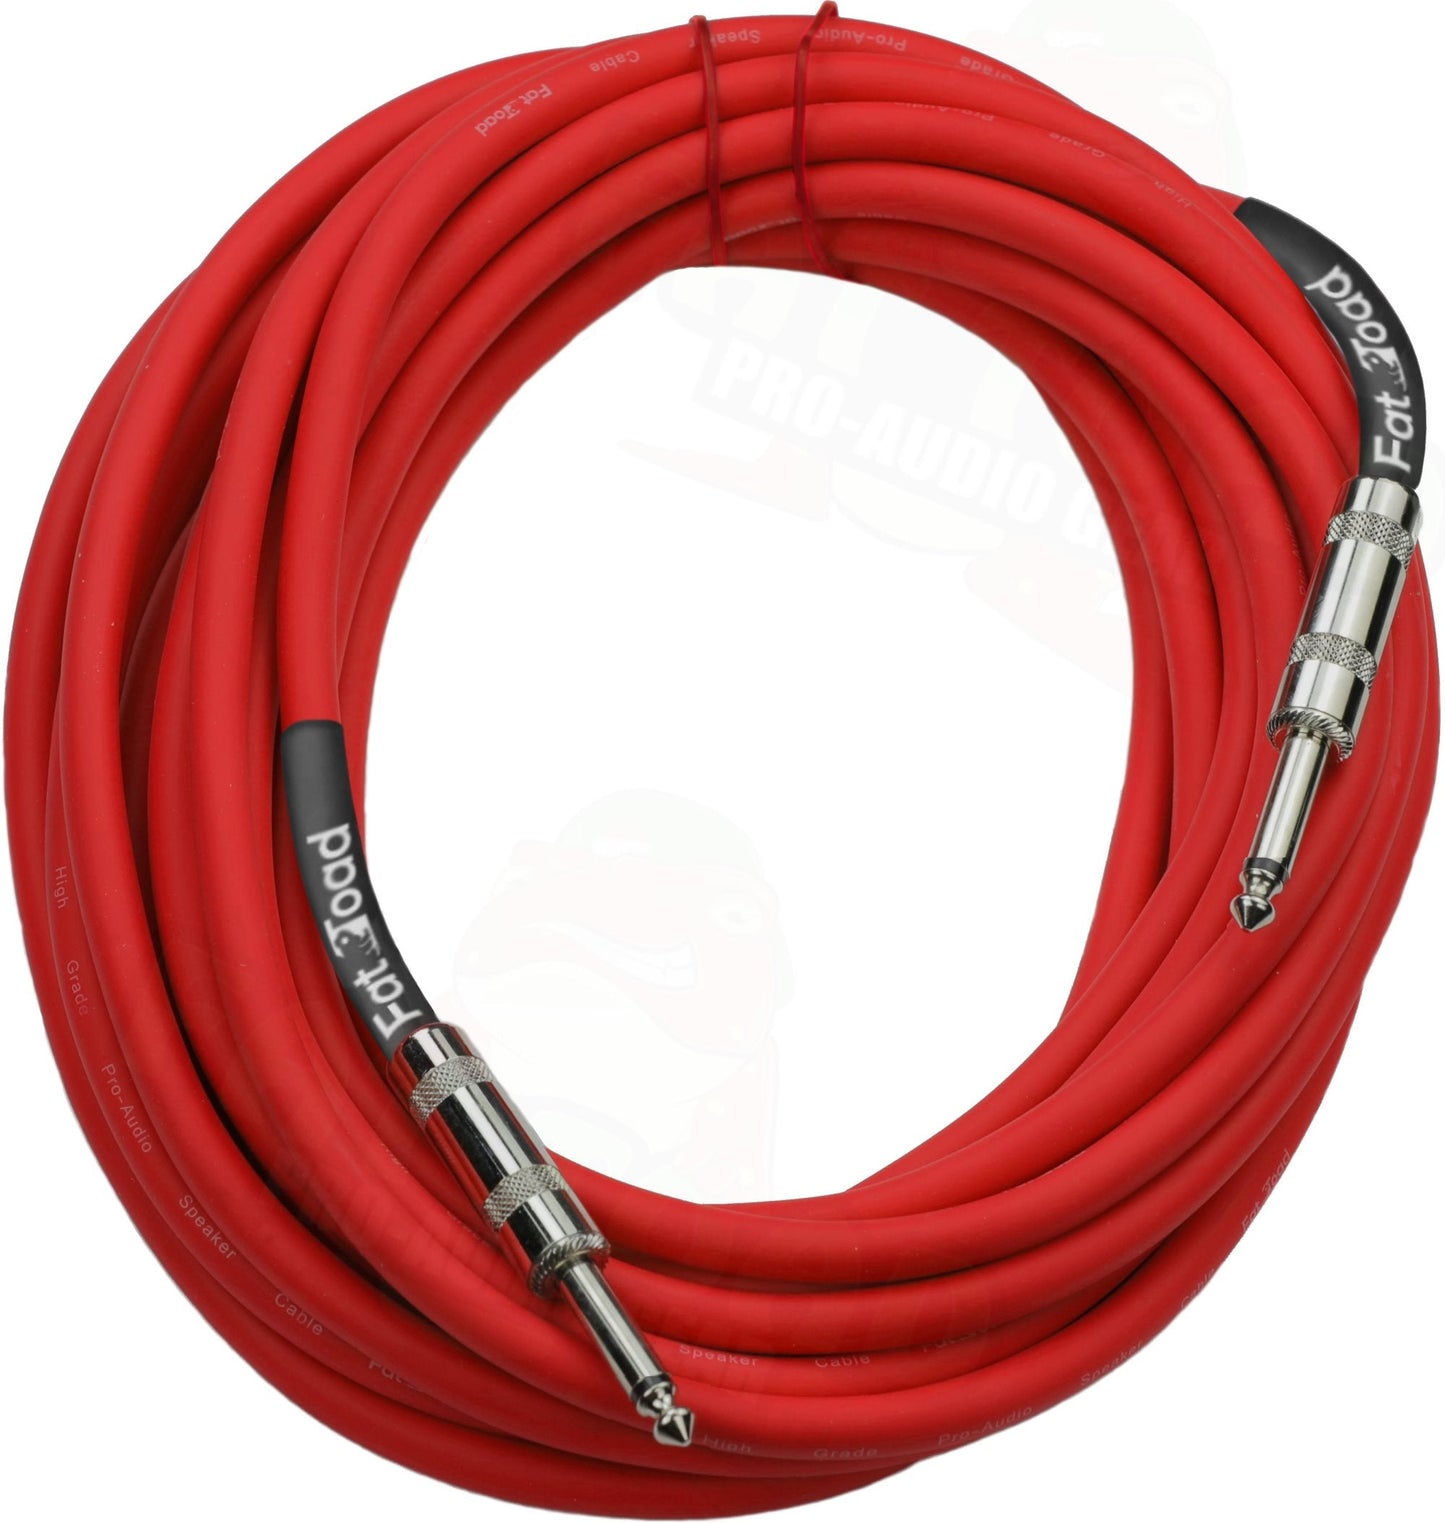 1/4" to 1/4 Male Jack Speaker Cables (2 Pack) by FAT TOAD - 25ft Professional Pro Audio Red DJ Speakers PA Patch Cords - Quarter Inch 12 AWG Wire